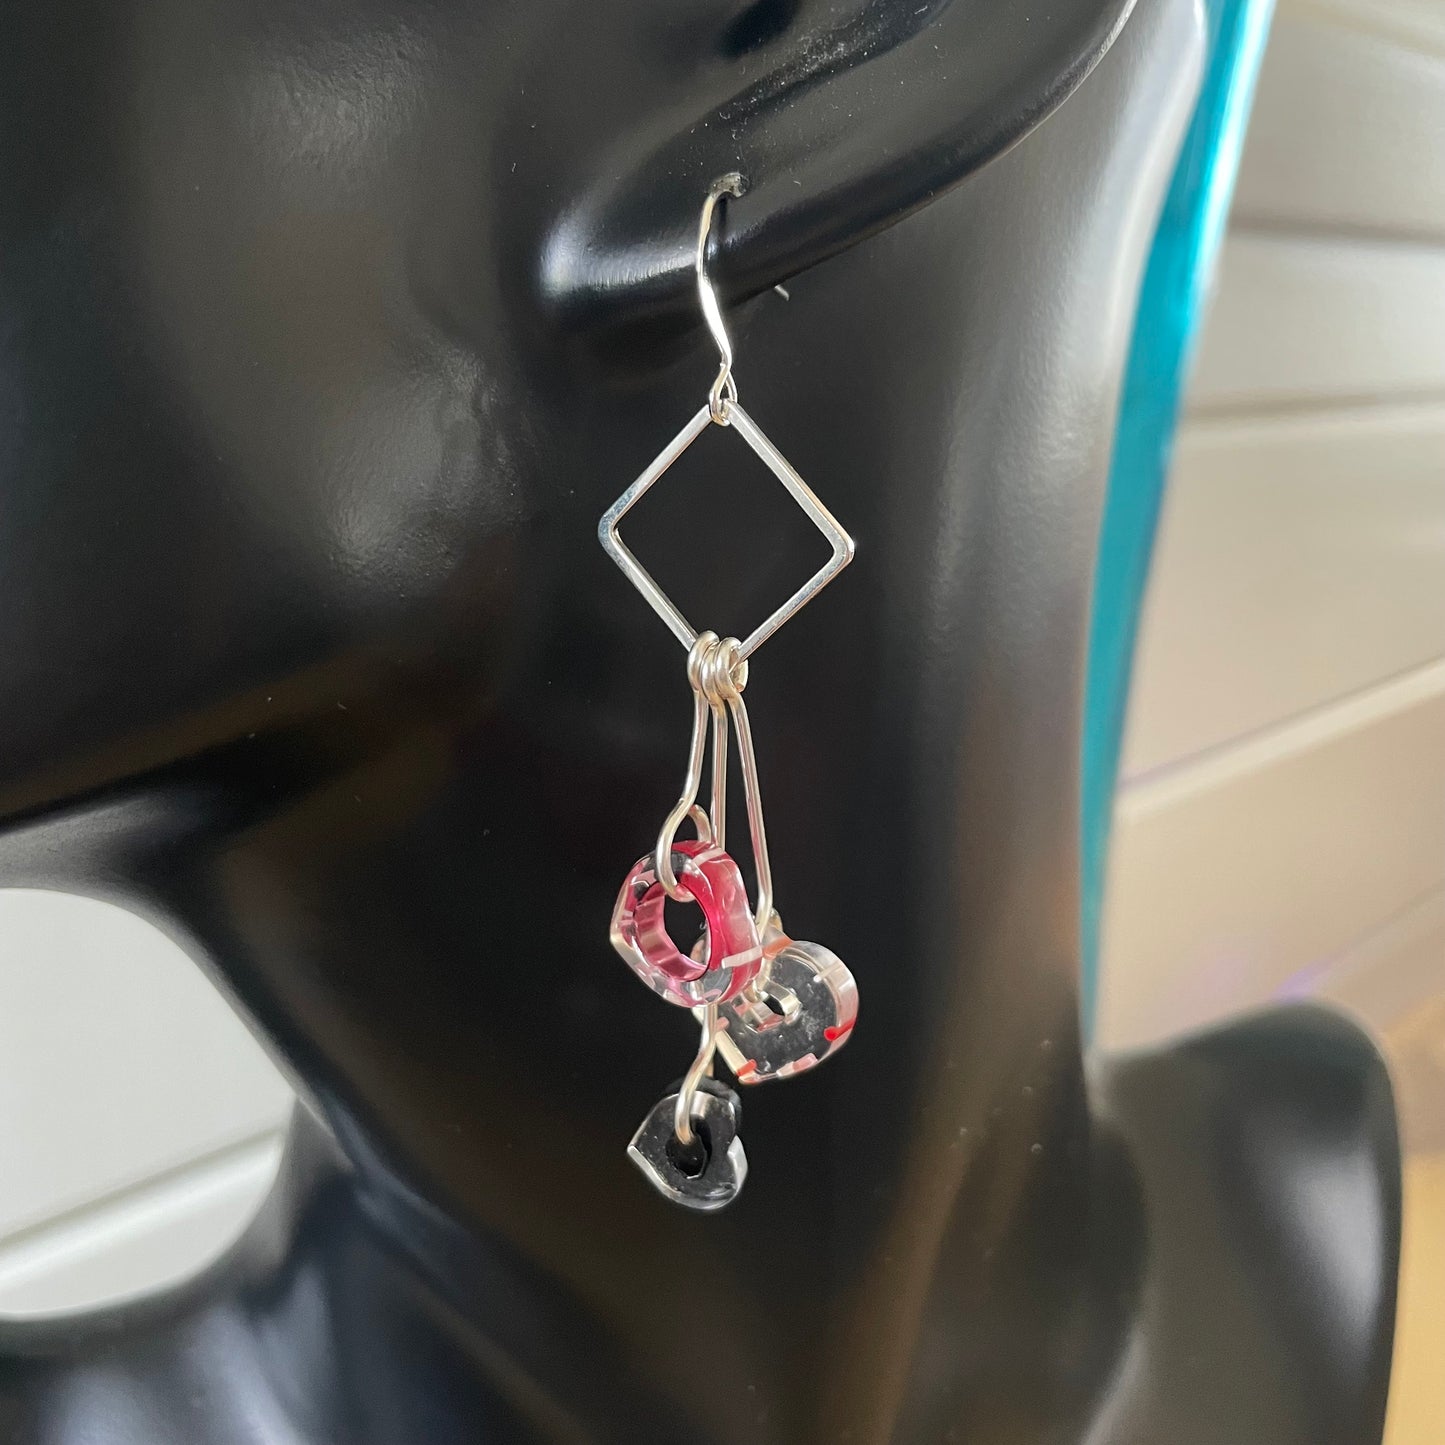 Cane Glass Heart Dangle Earrings 2.5" Long Geometric Clear Red White Black Stripes Valentine's Red Clear Black Layered